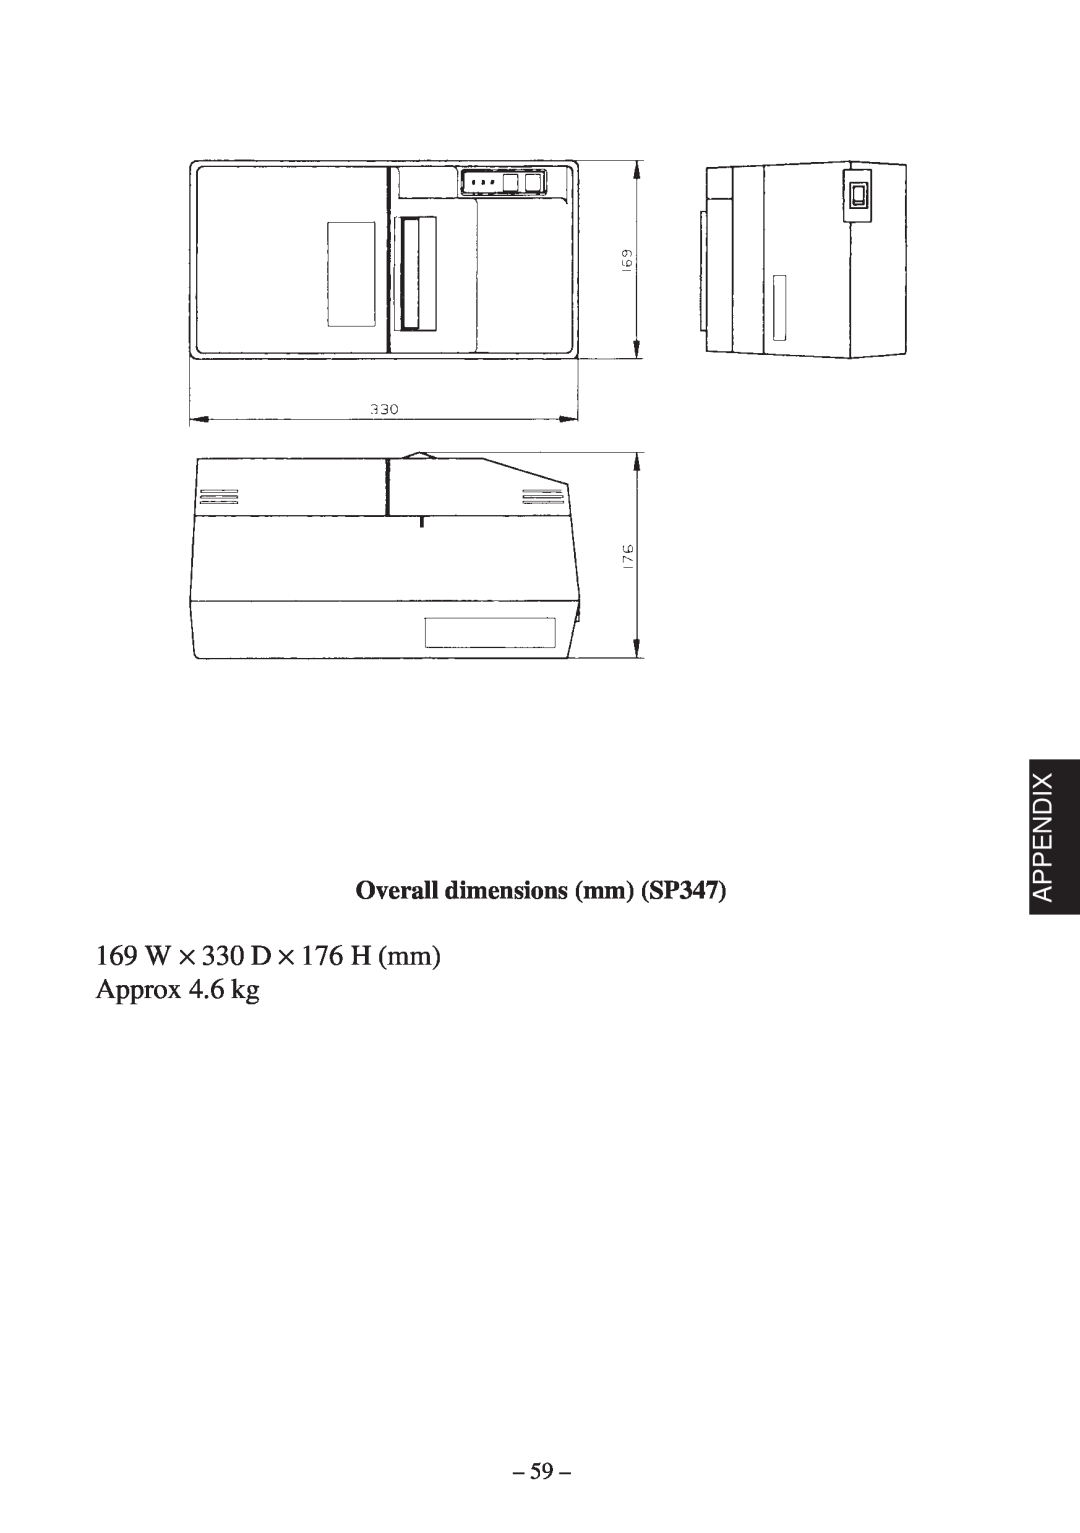 Star Micronics 347F user manual 169 W × 330 D × 176 H mm Approx 4.6 kg, Overall dimensions mm SP347, Appendix 